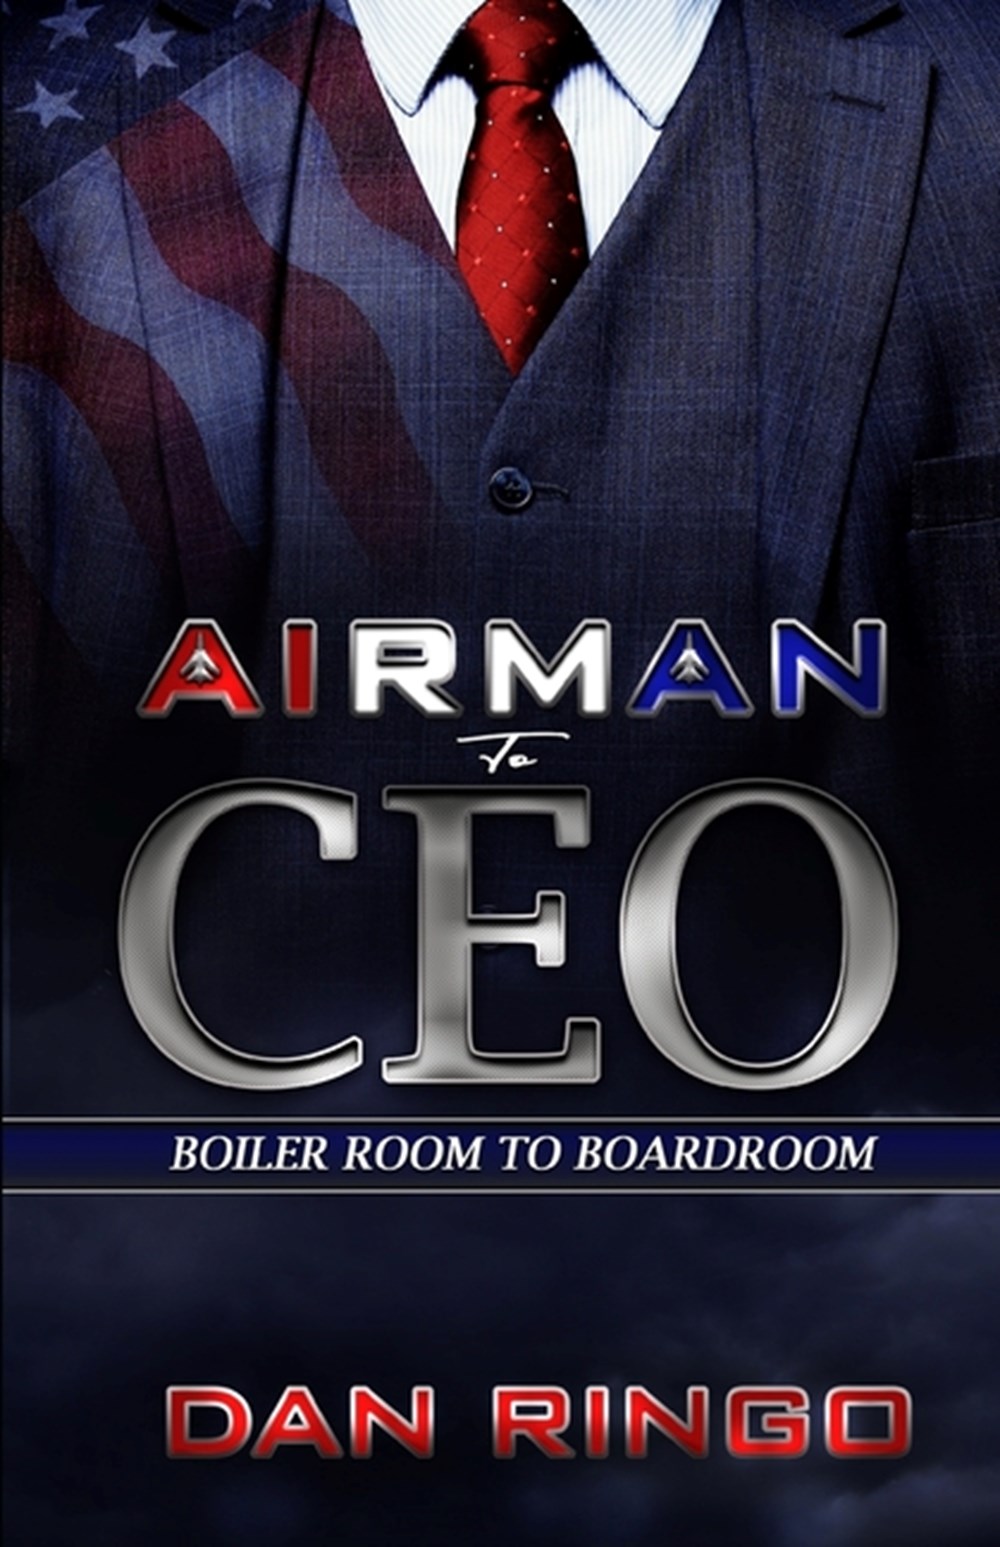 Airman to CEO From the Boiler Room to the Boardroom